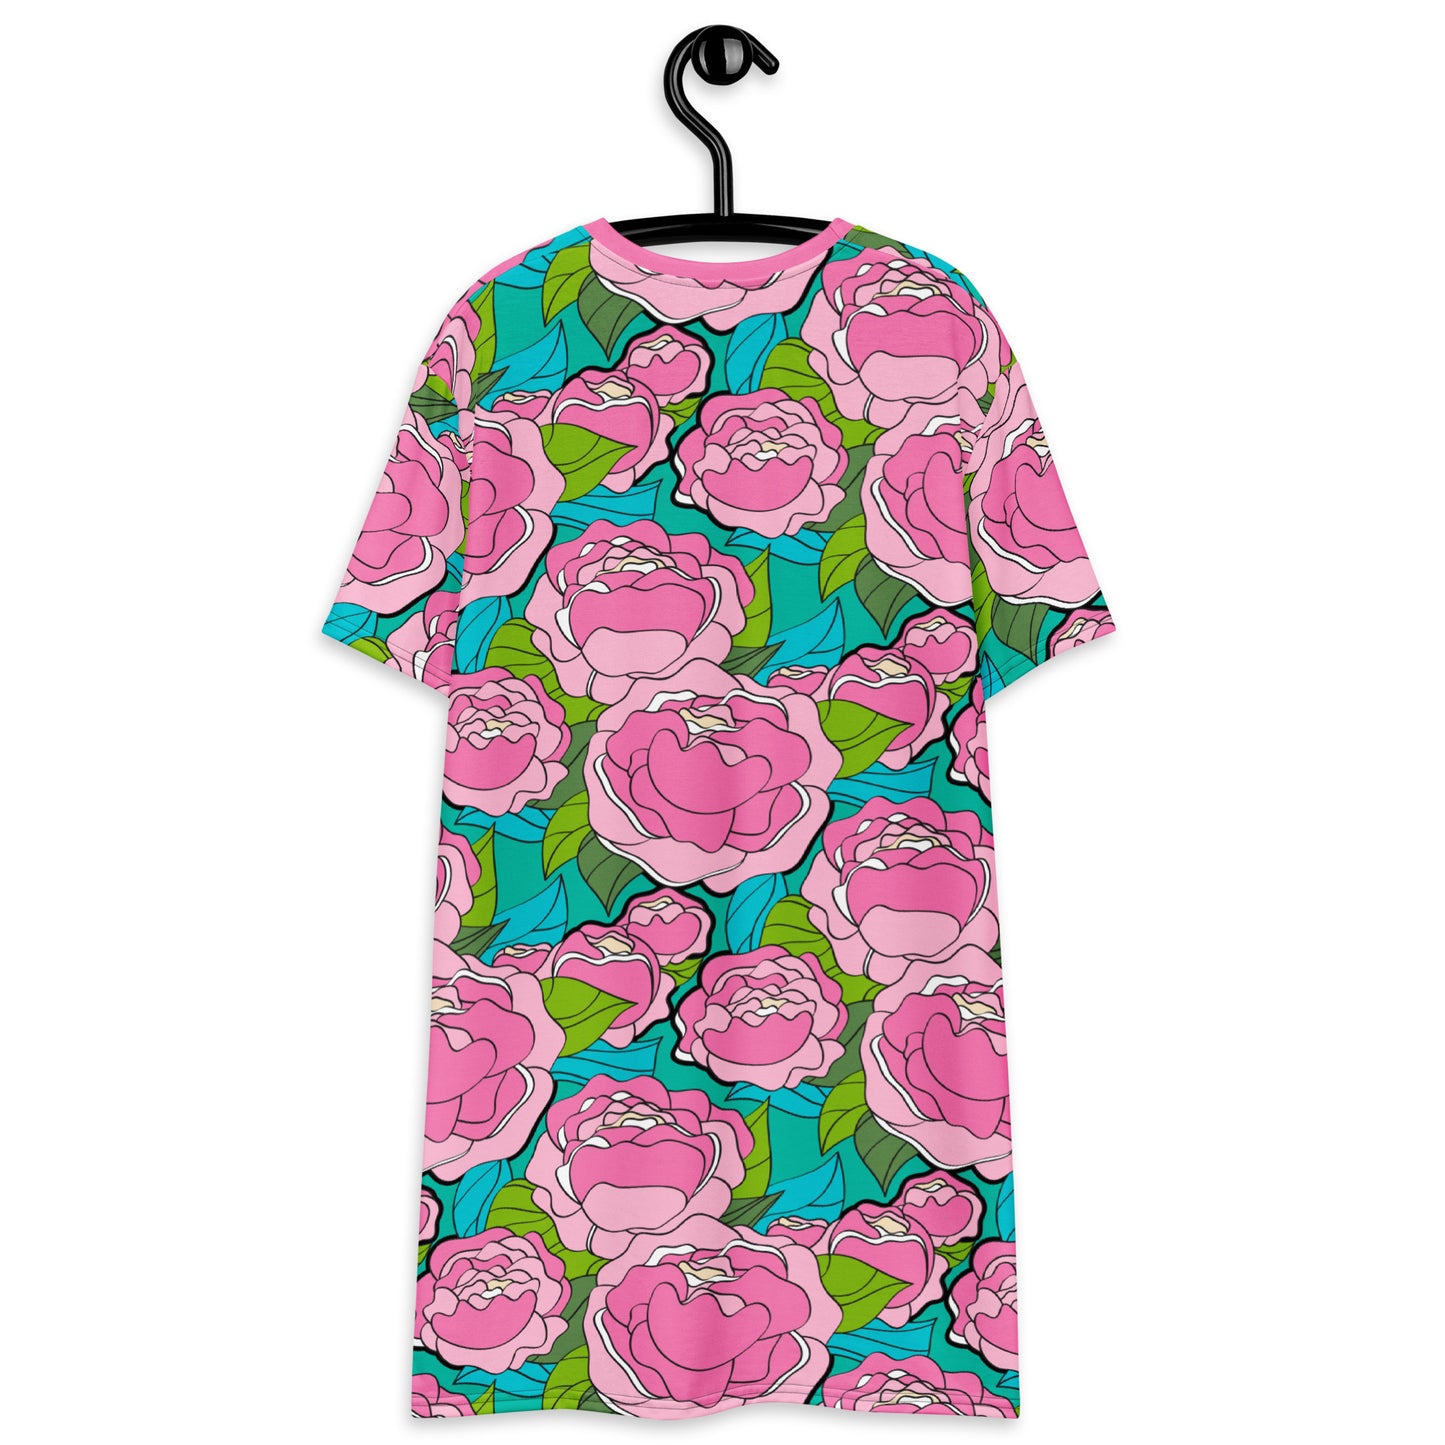 BE MY ONLY pink turquoise - T-shirt dress